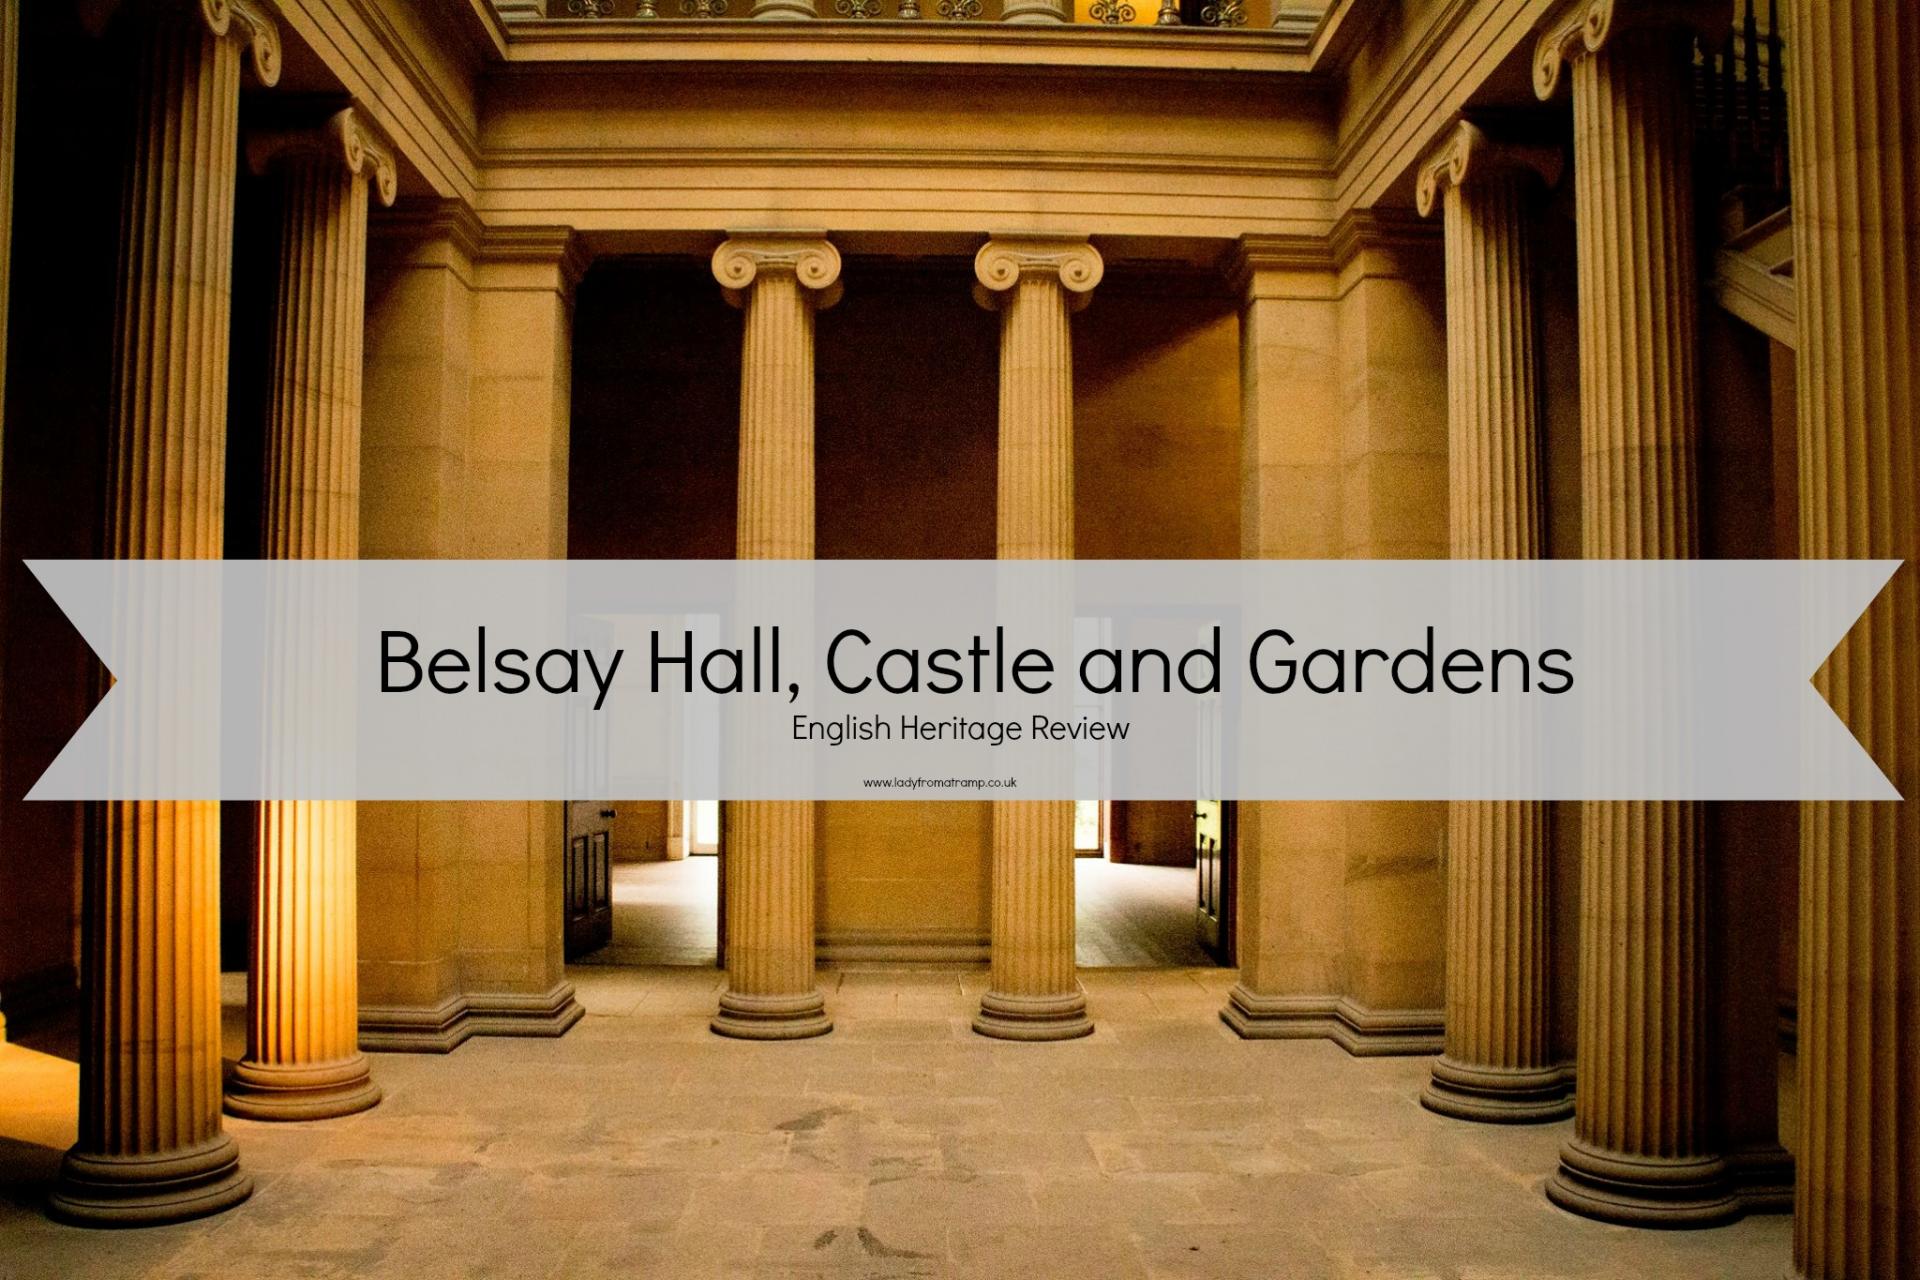 Belsay Hall, Castle and Gardens, Northumberland - English Heritage